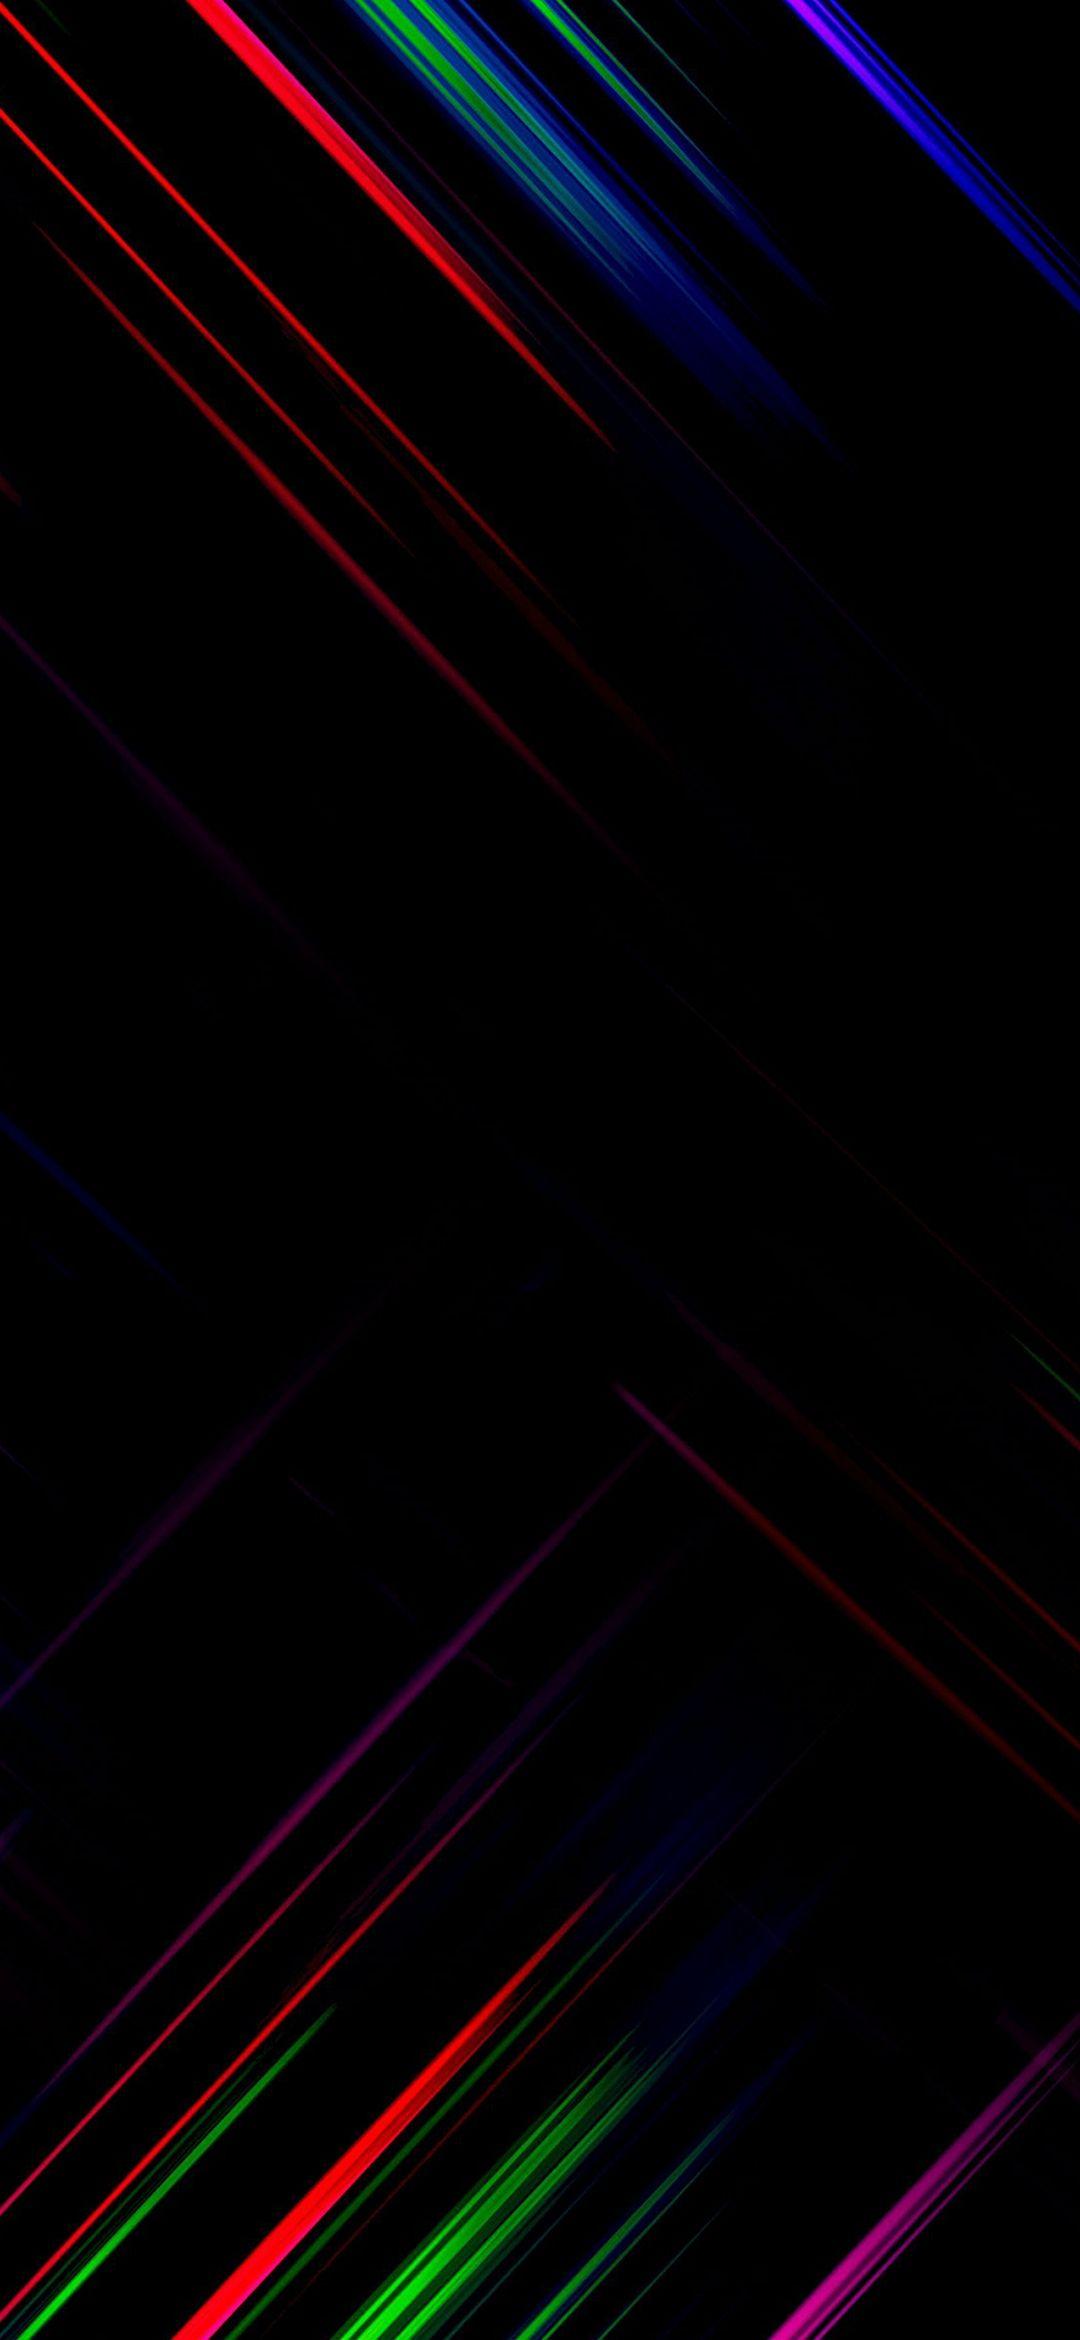 1080 X 2340 AMOLED Wallpapers - Top Free 1080 X 2340 AMOLED Backgrounds ...